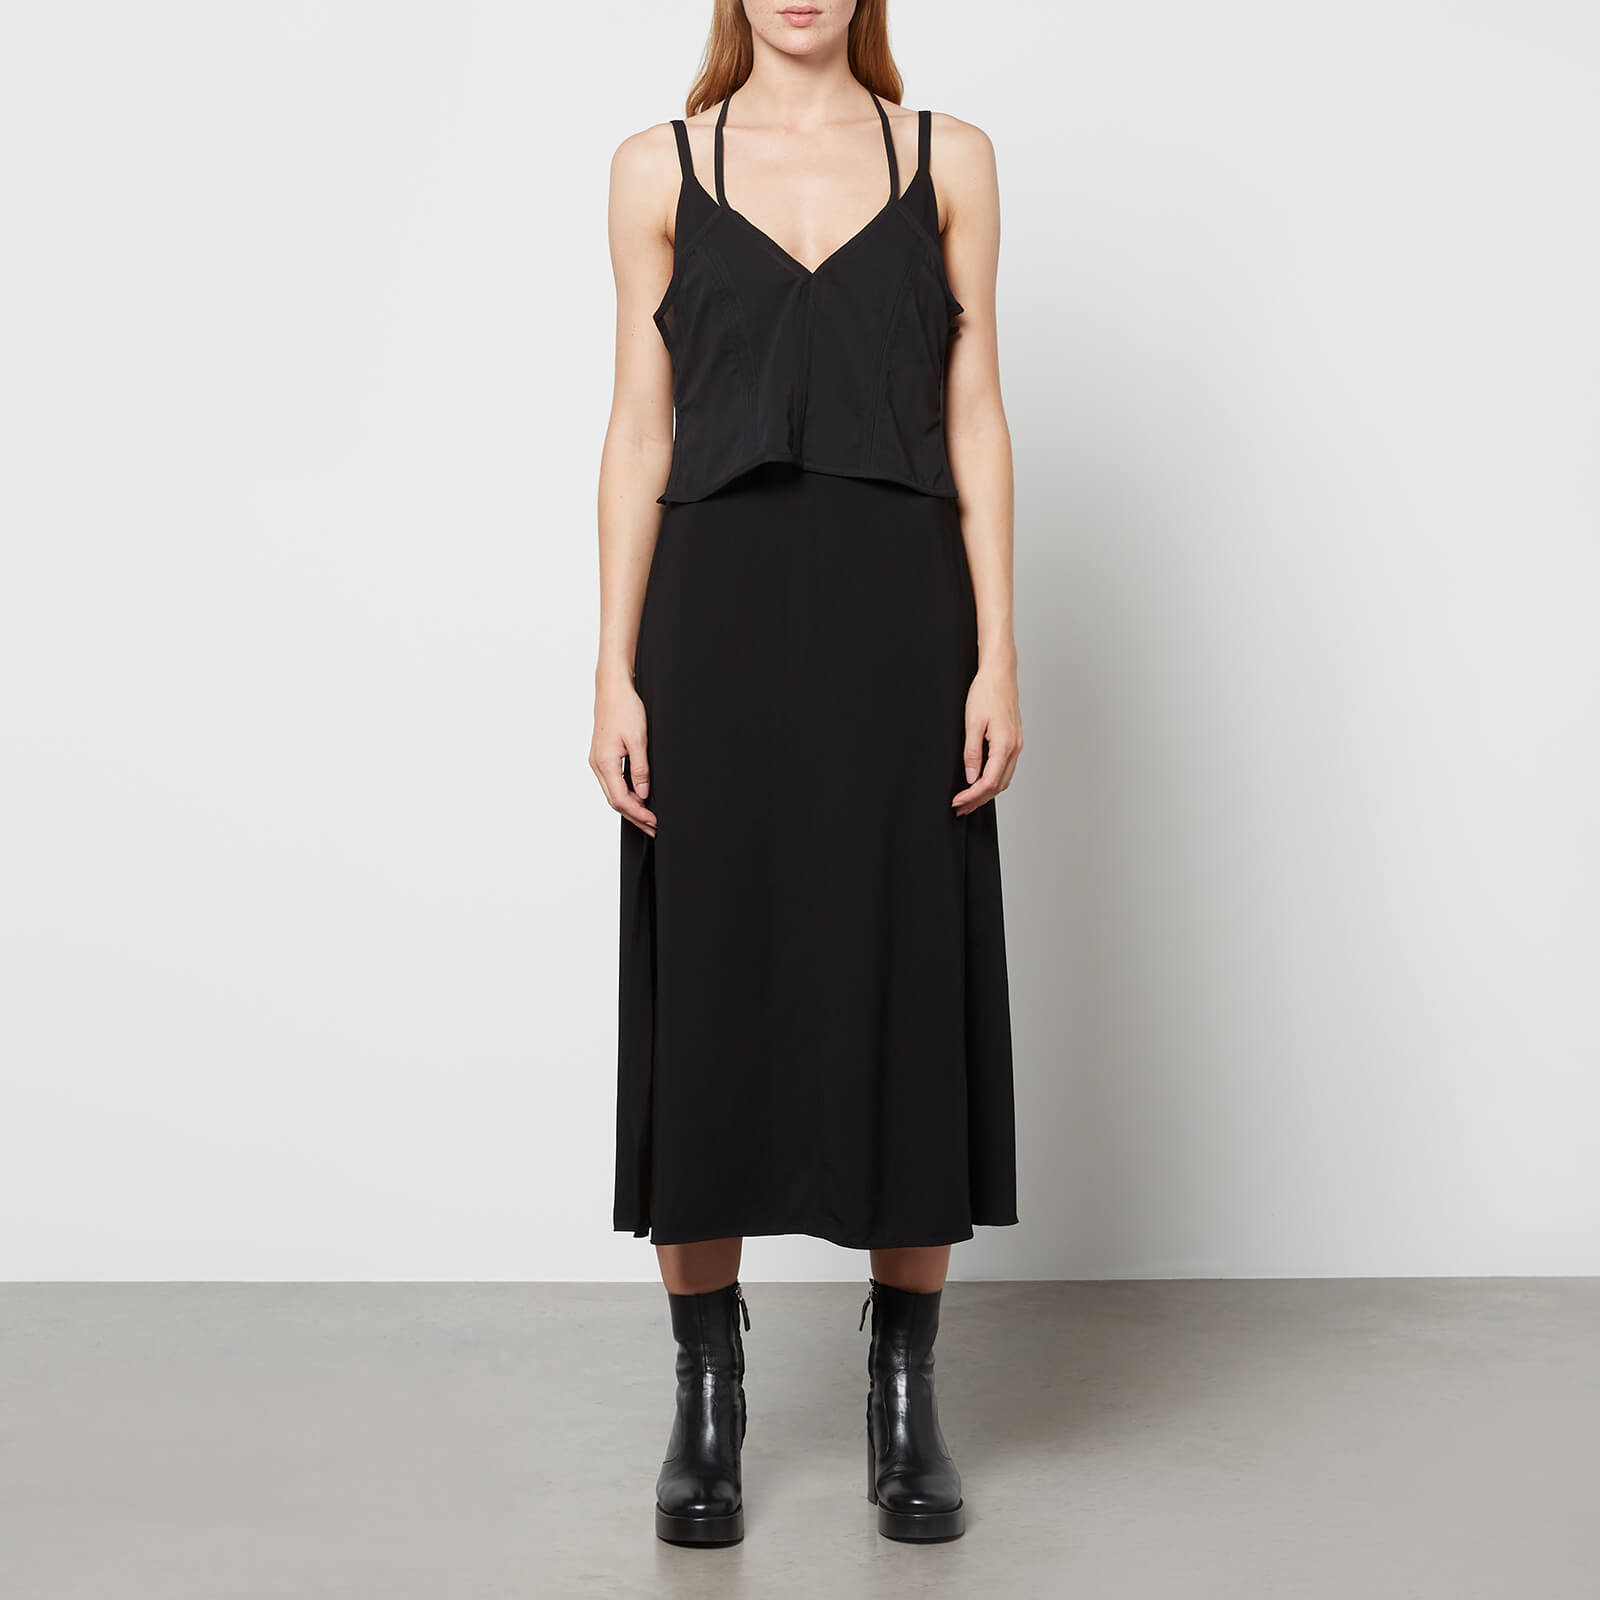 3.1 phillip lim women's cami dress with deconstructed layer - black - us 2/uk 8